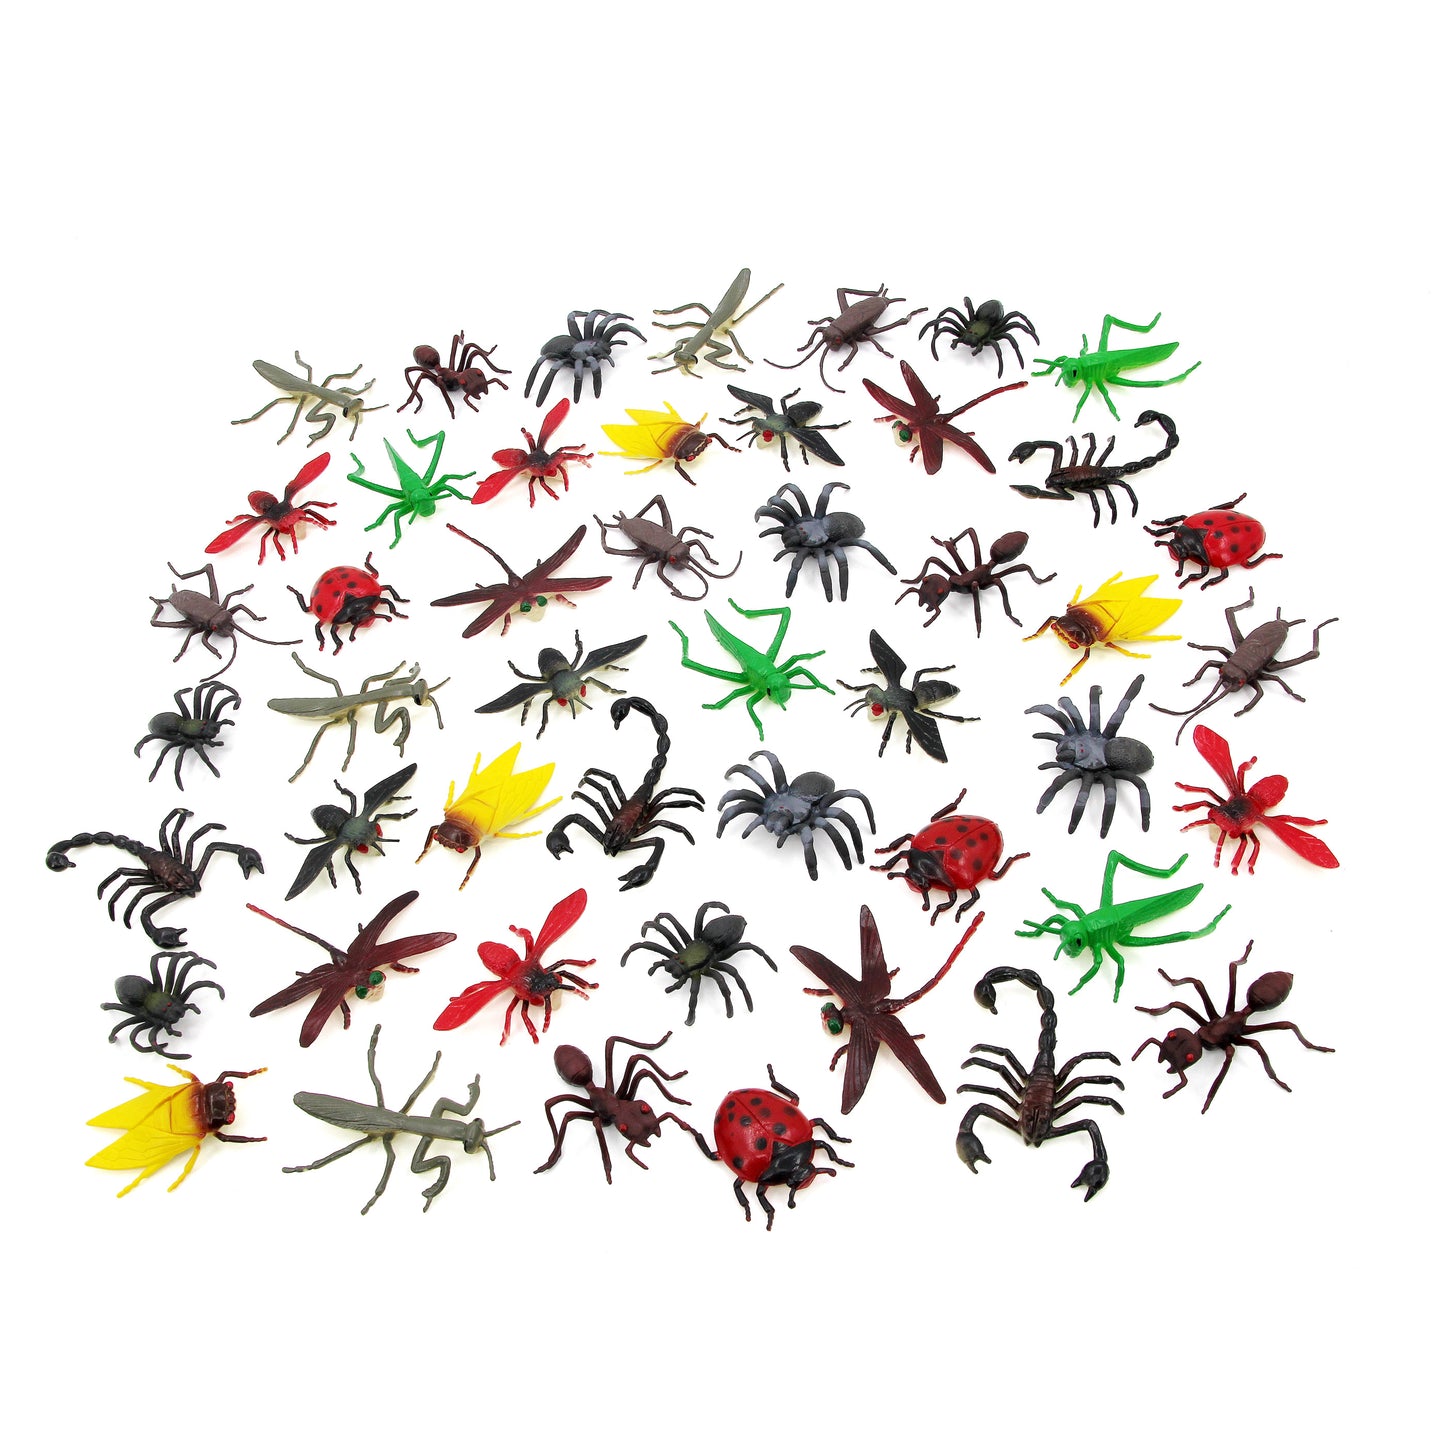 Wenno Insects Counters 60 pcs 迷你昆蟲模型